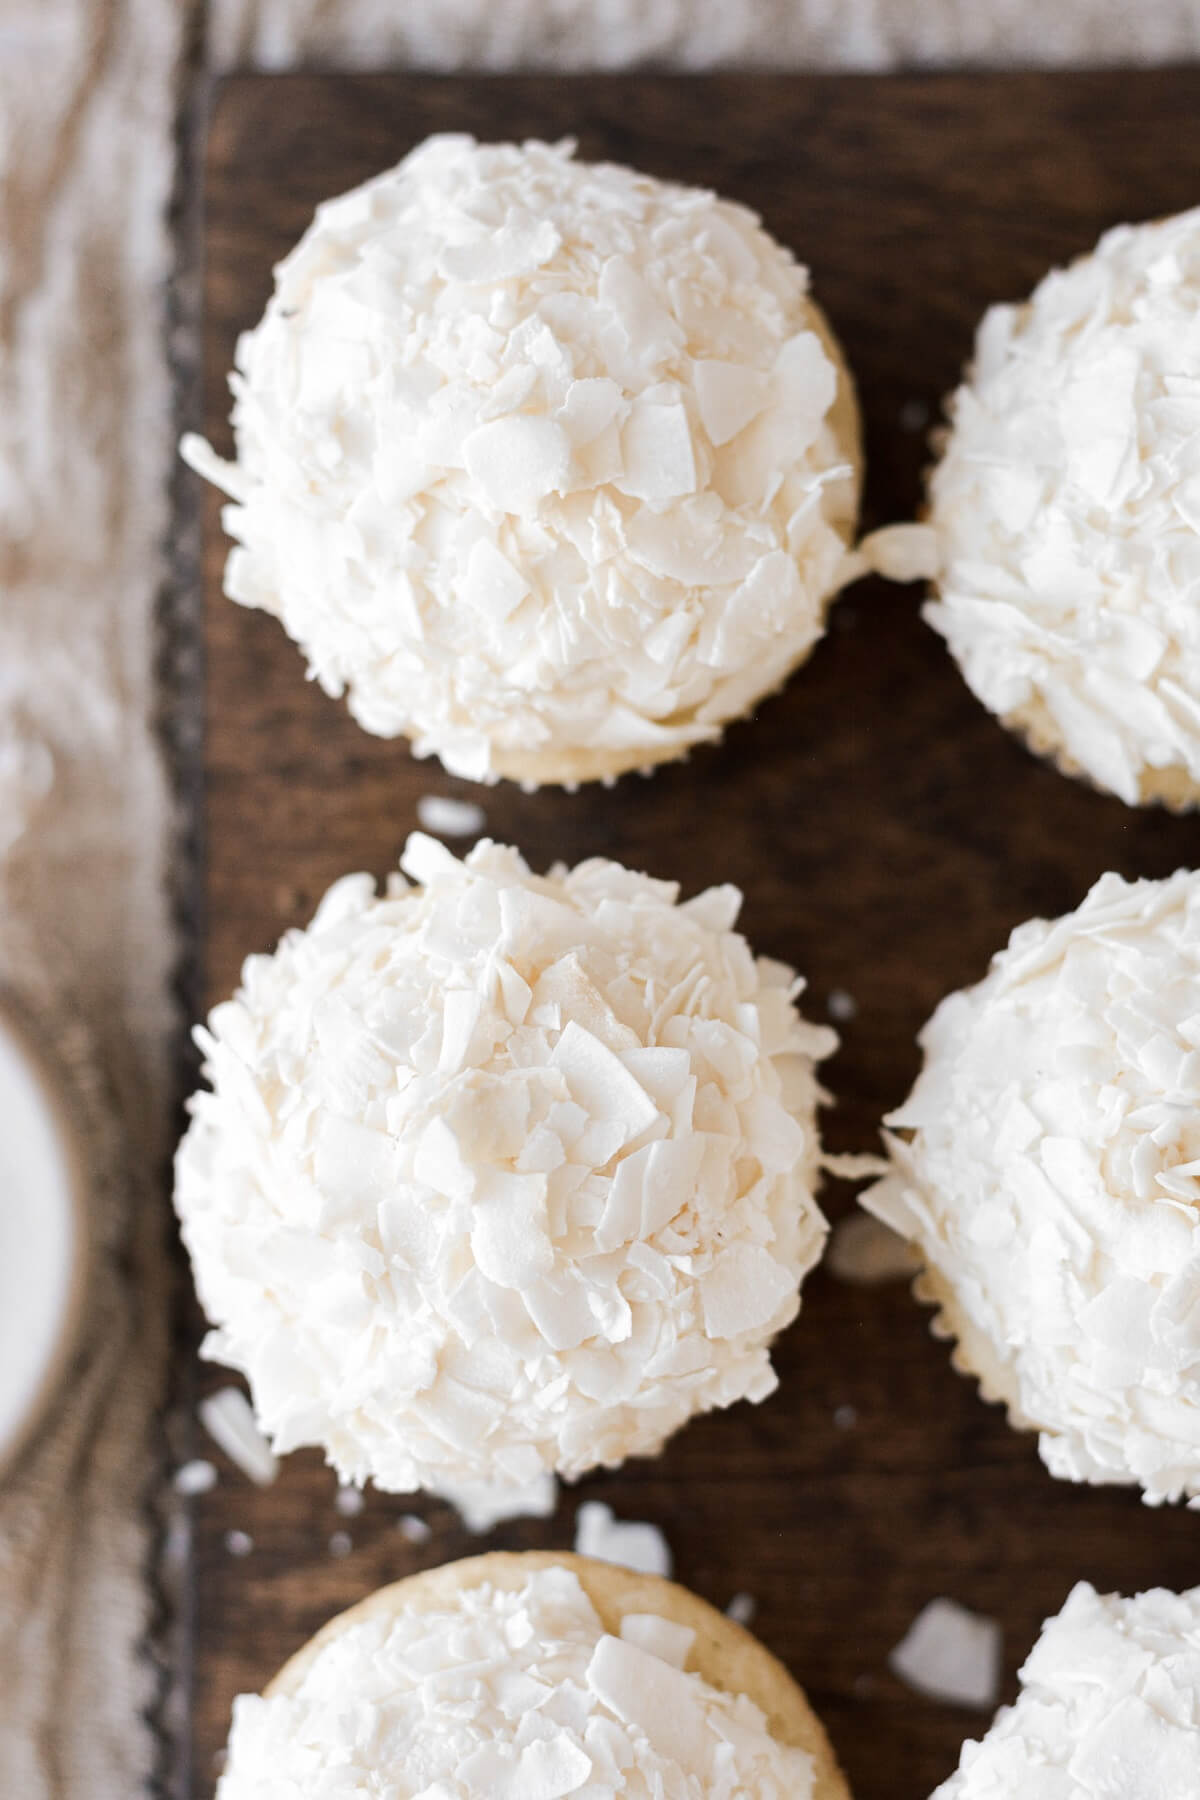 Coconut cupcakes covered in coconut flakes.